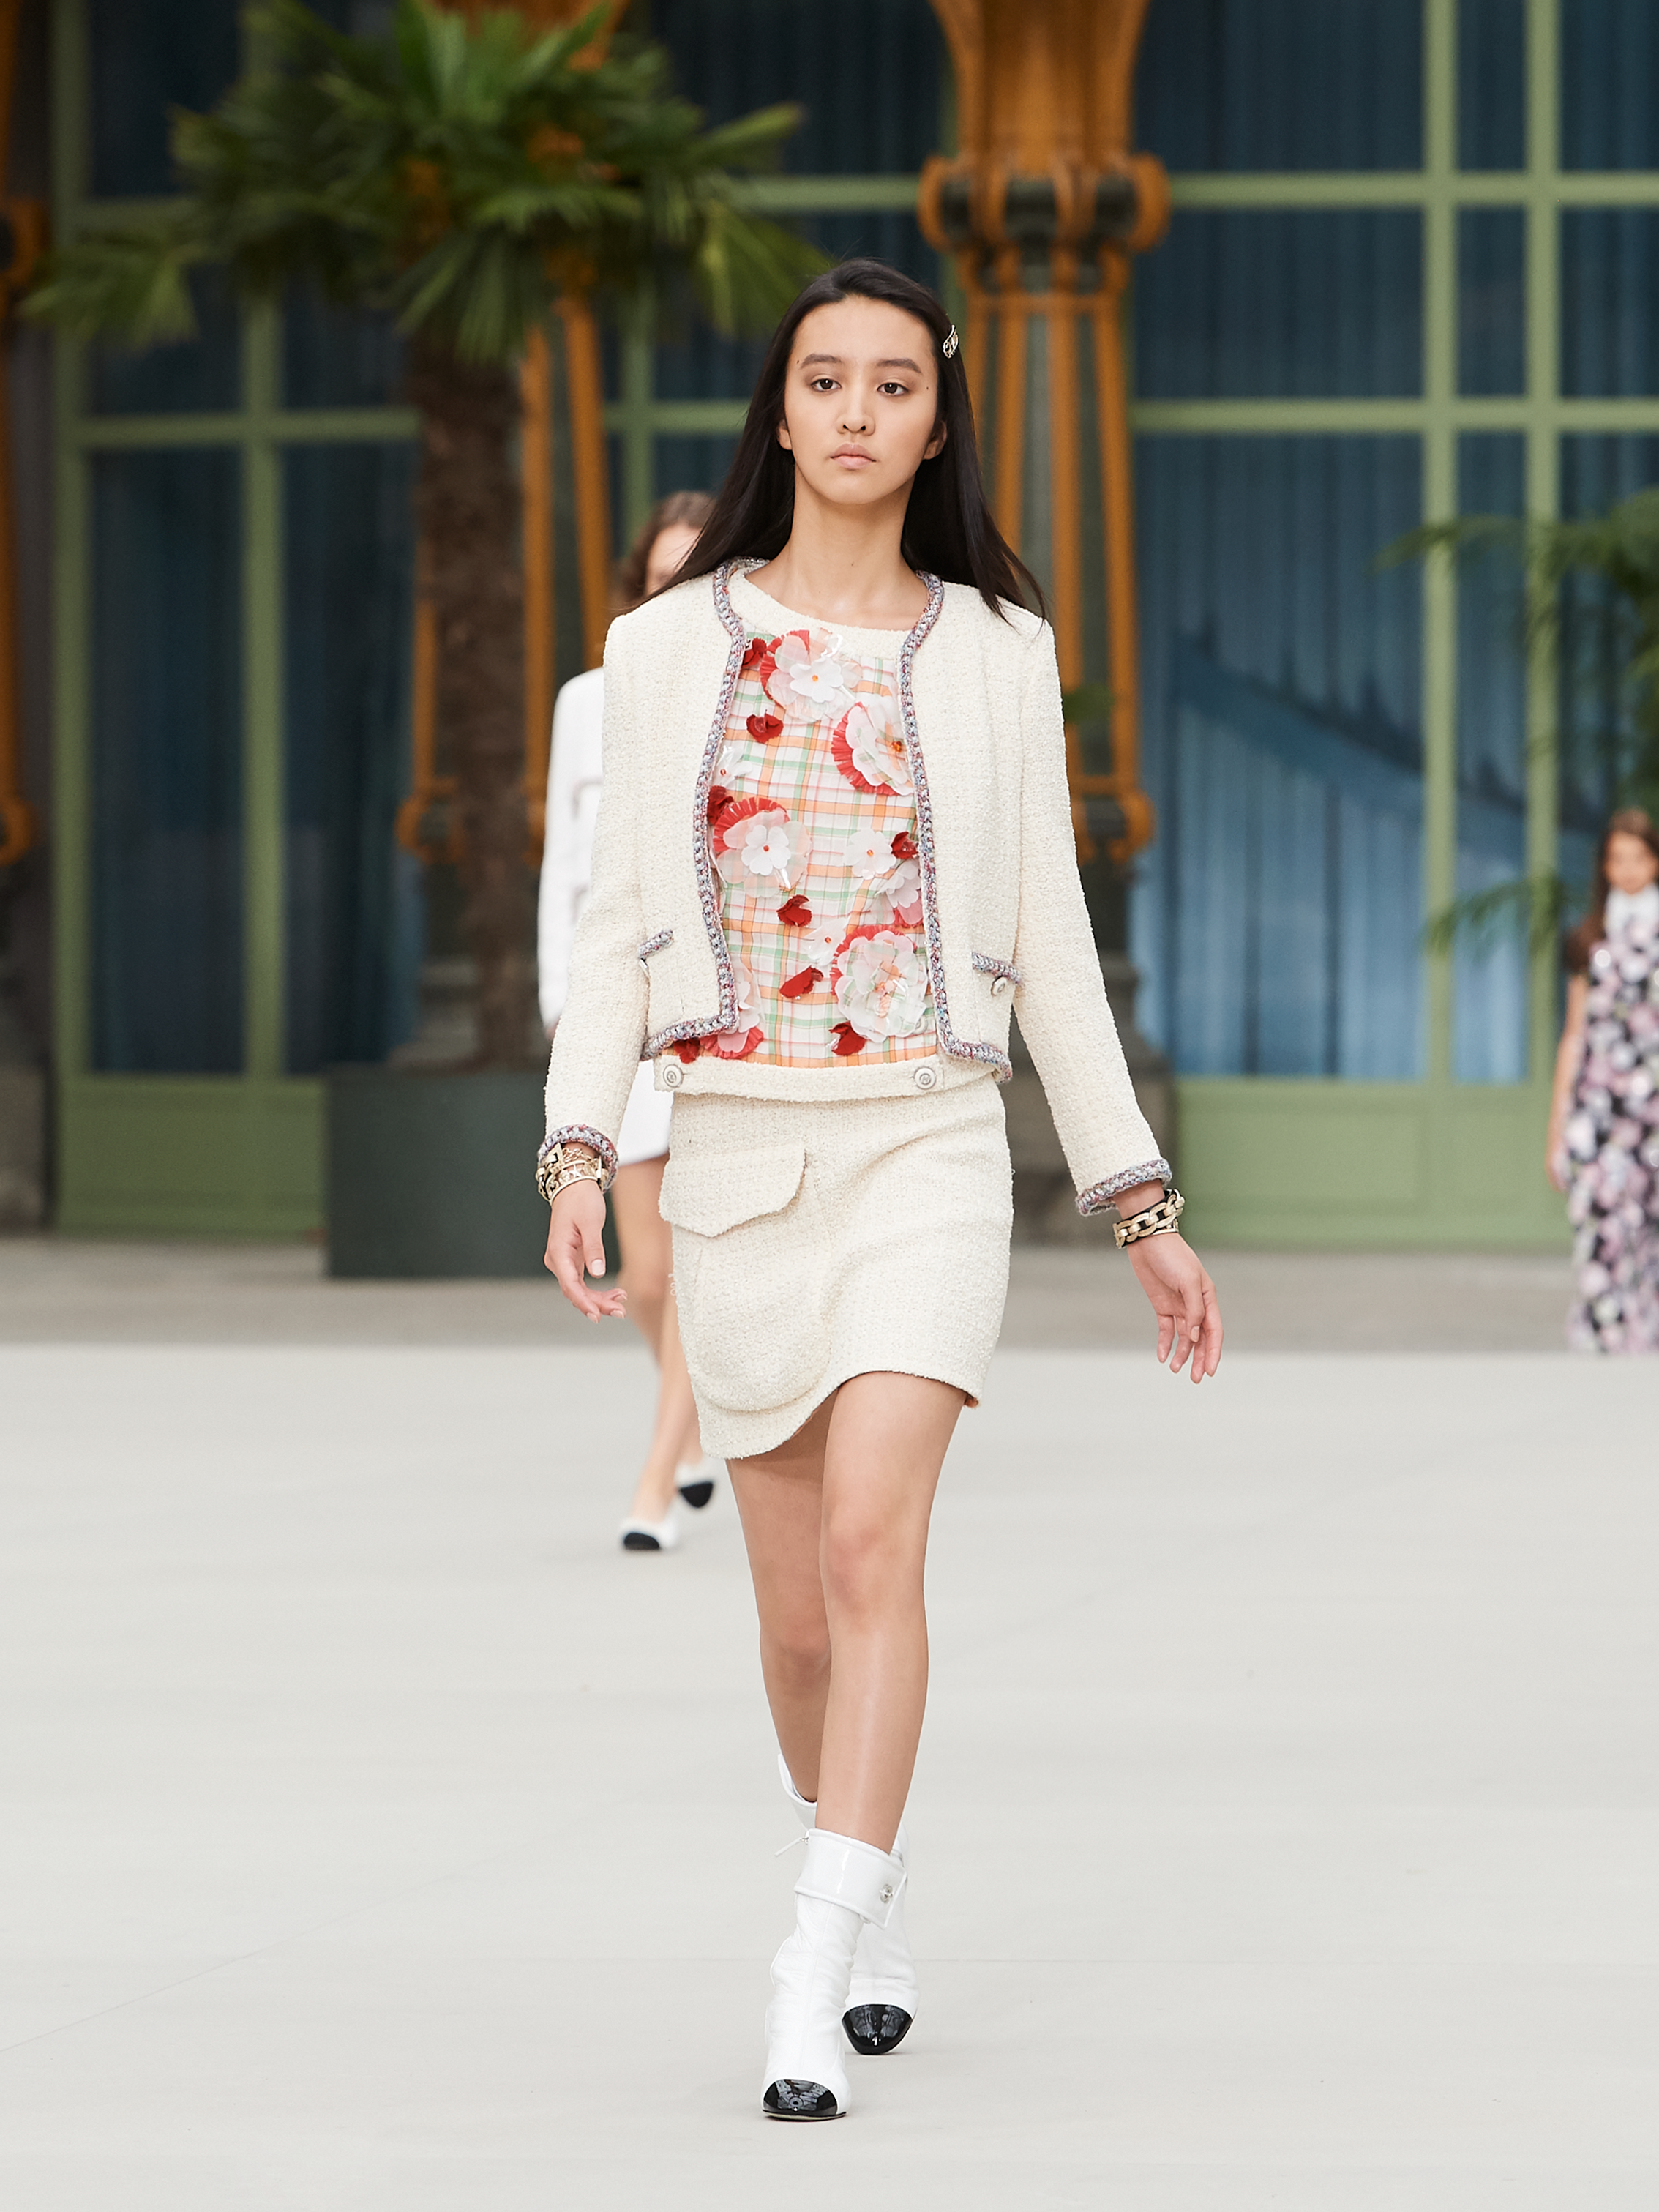 Chanel Cruise 2020, Courtesy of Chanel